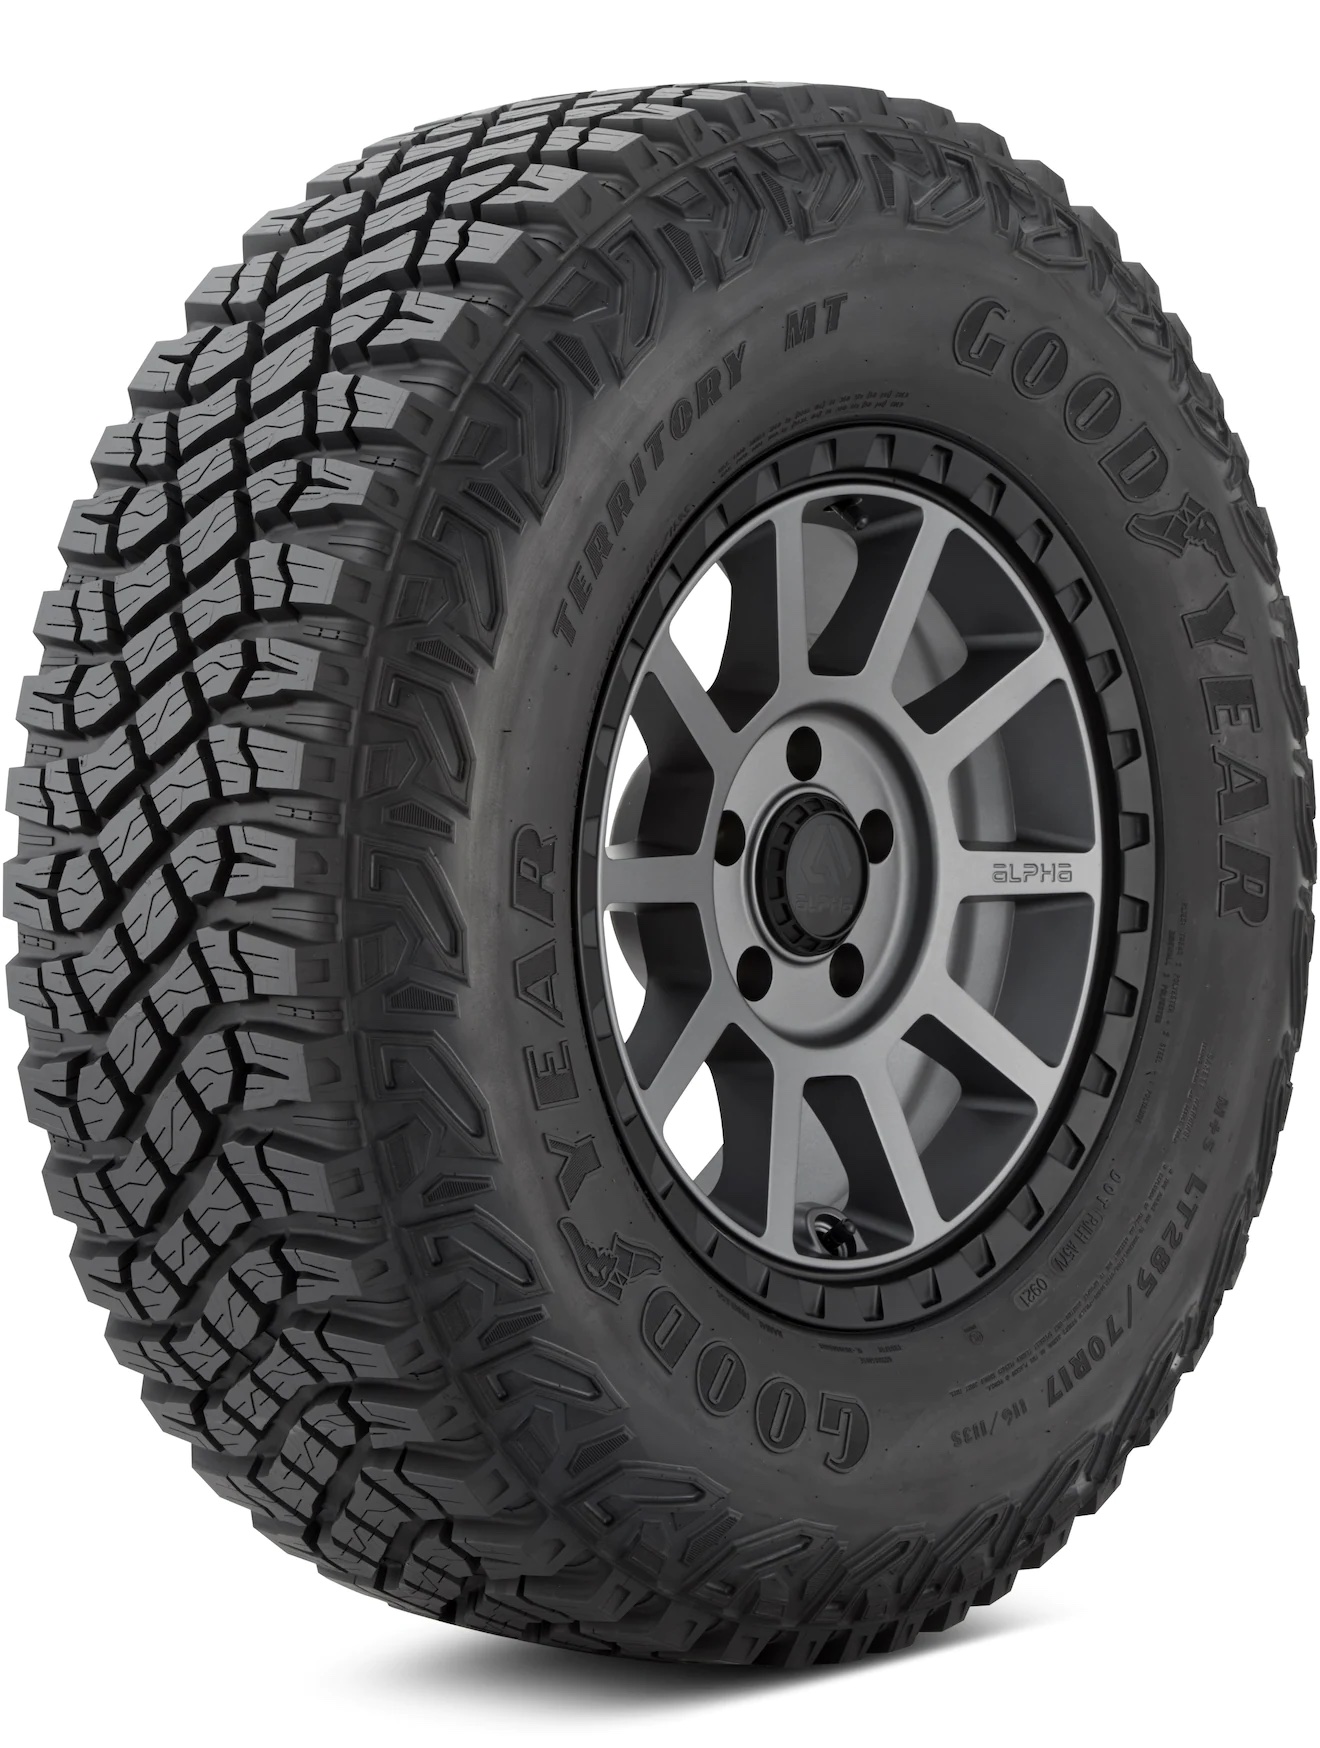 Ford Bronco Sasquatch Tire Replacement (Rock Flingers) gy_wrangler_territory_mt_altbw_full